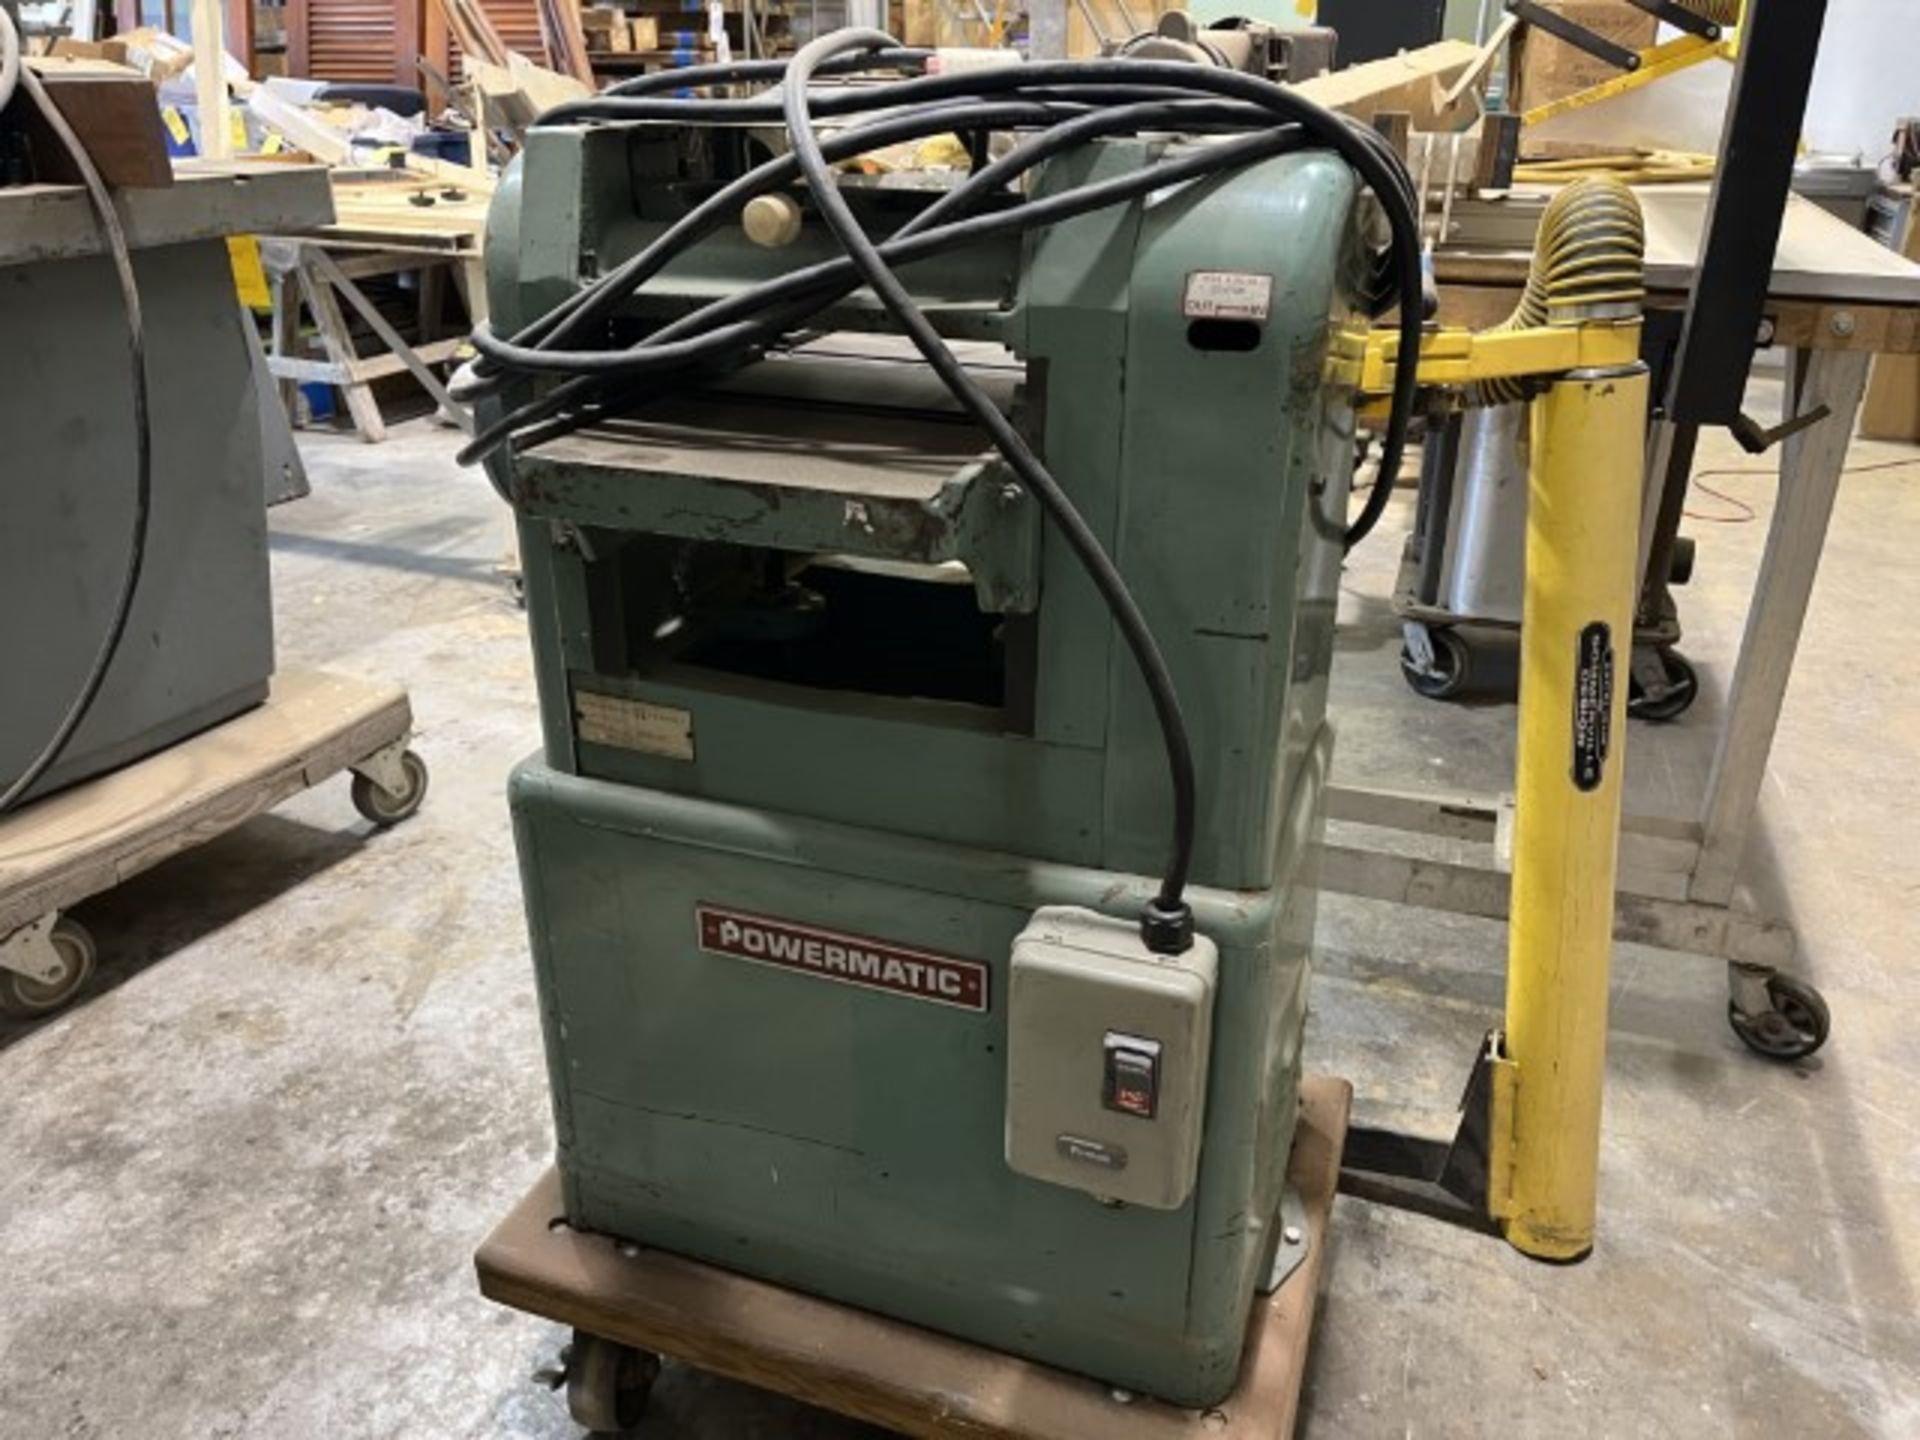 POWERLINE 100 12'' PLANER ON ROLLING BASE - SERIAL No. 7800134 - Image 3 of 8